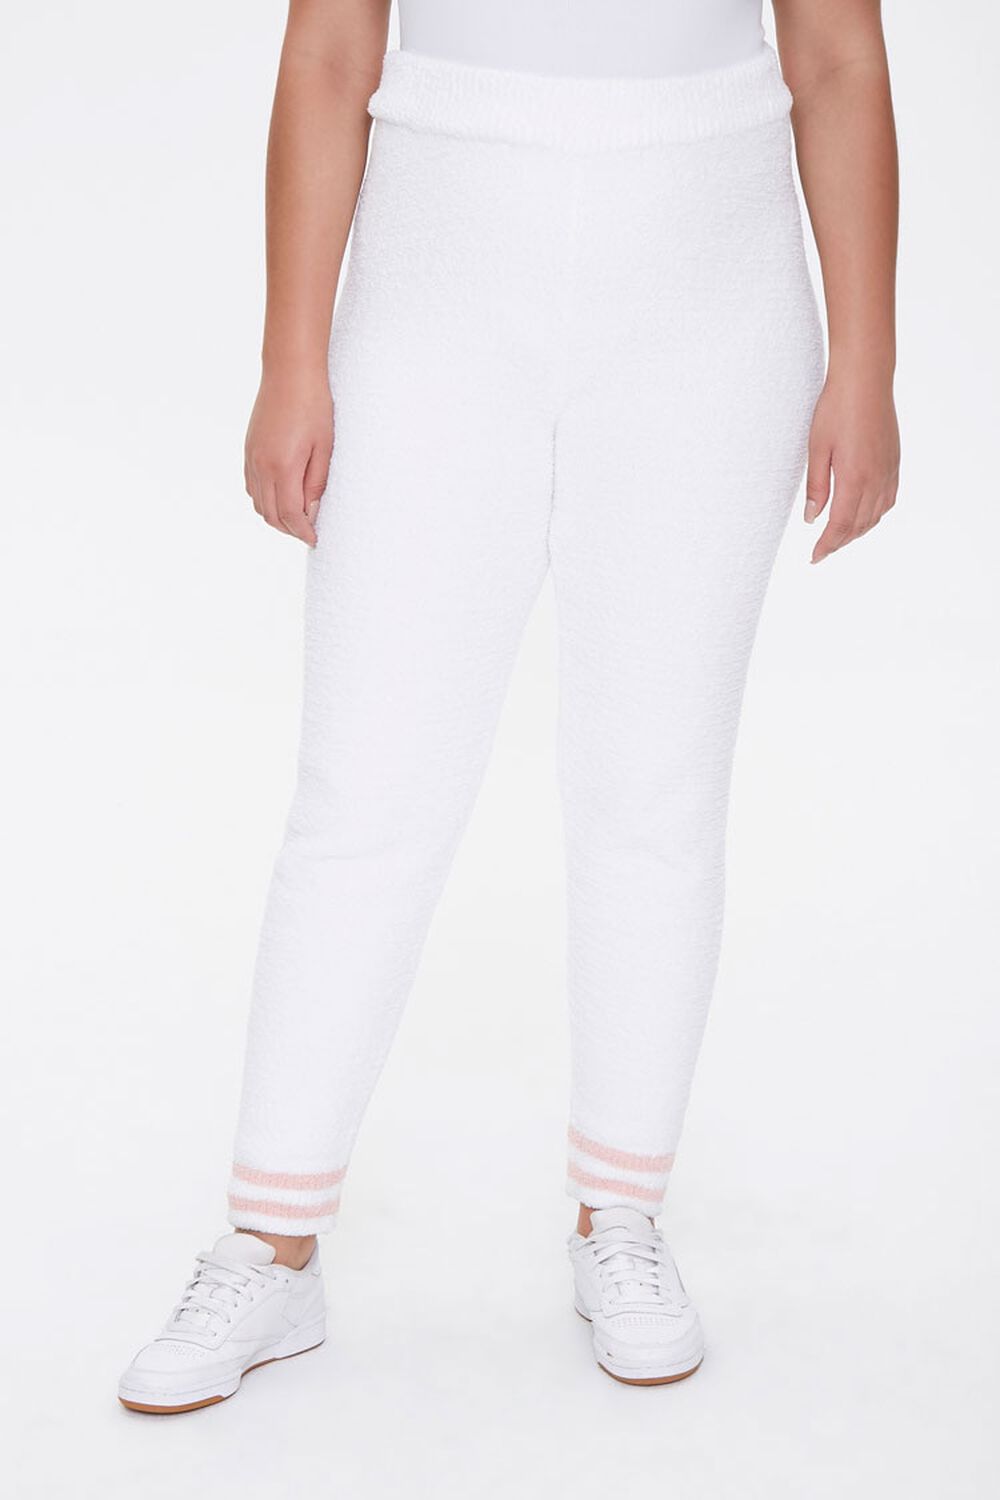 CREAM/ROSE Plus Size Sweater-Knit Striped Joggers, image 2